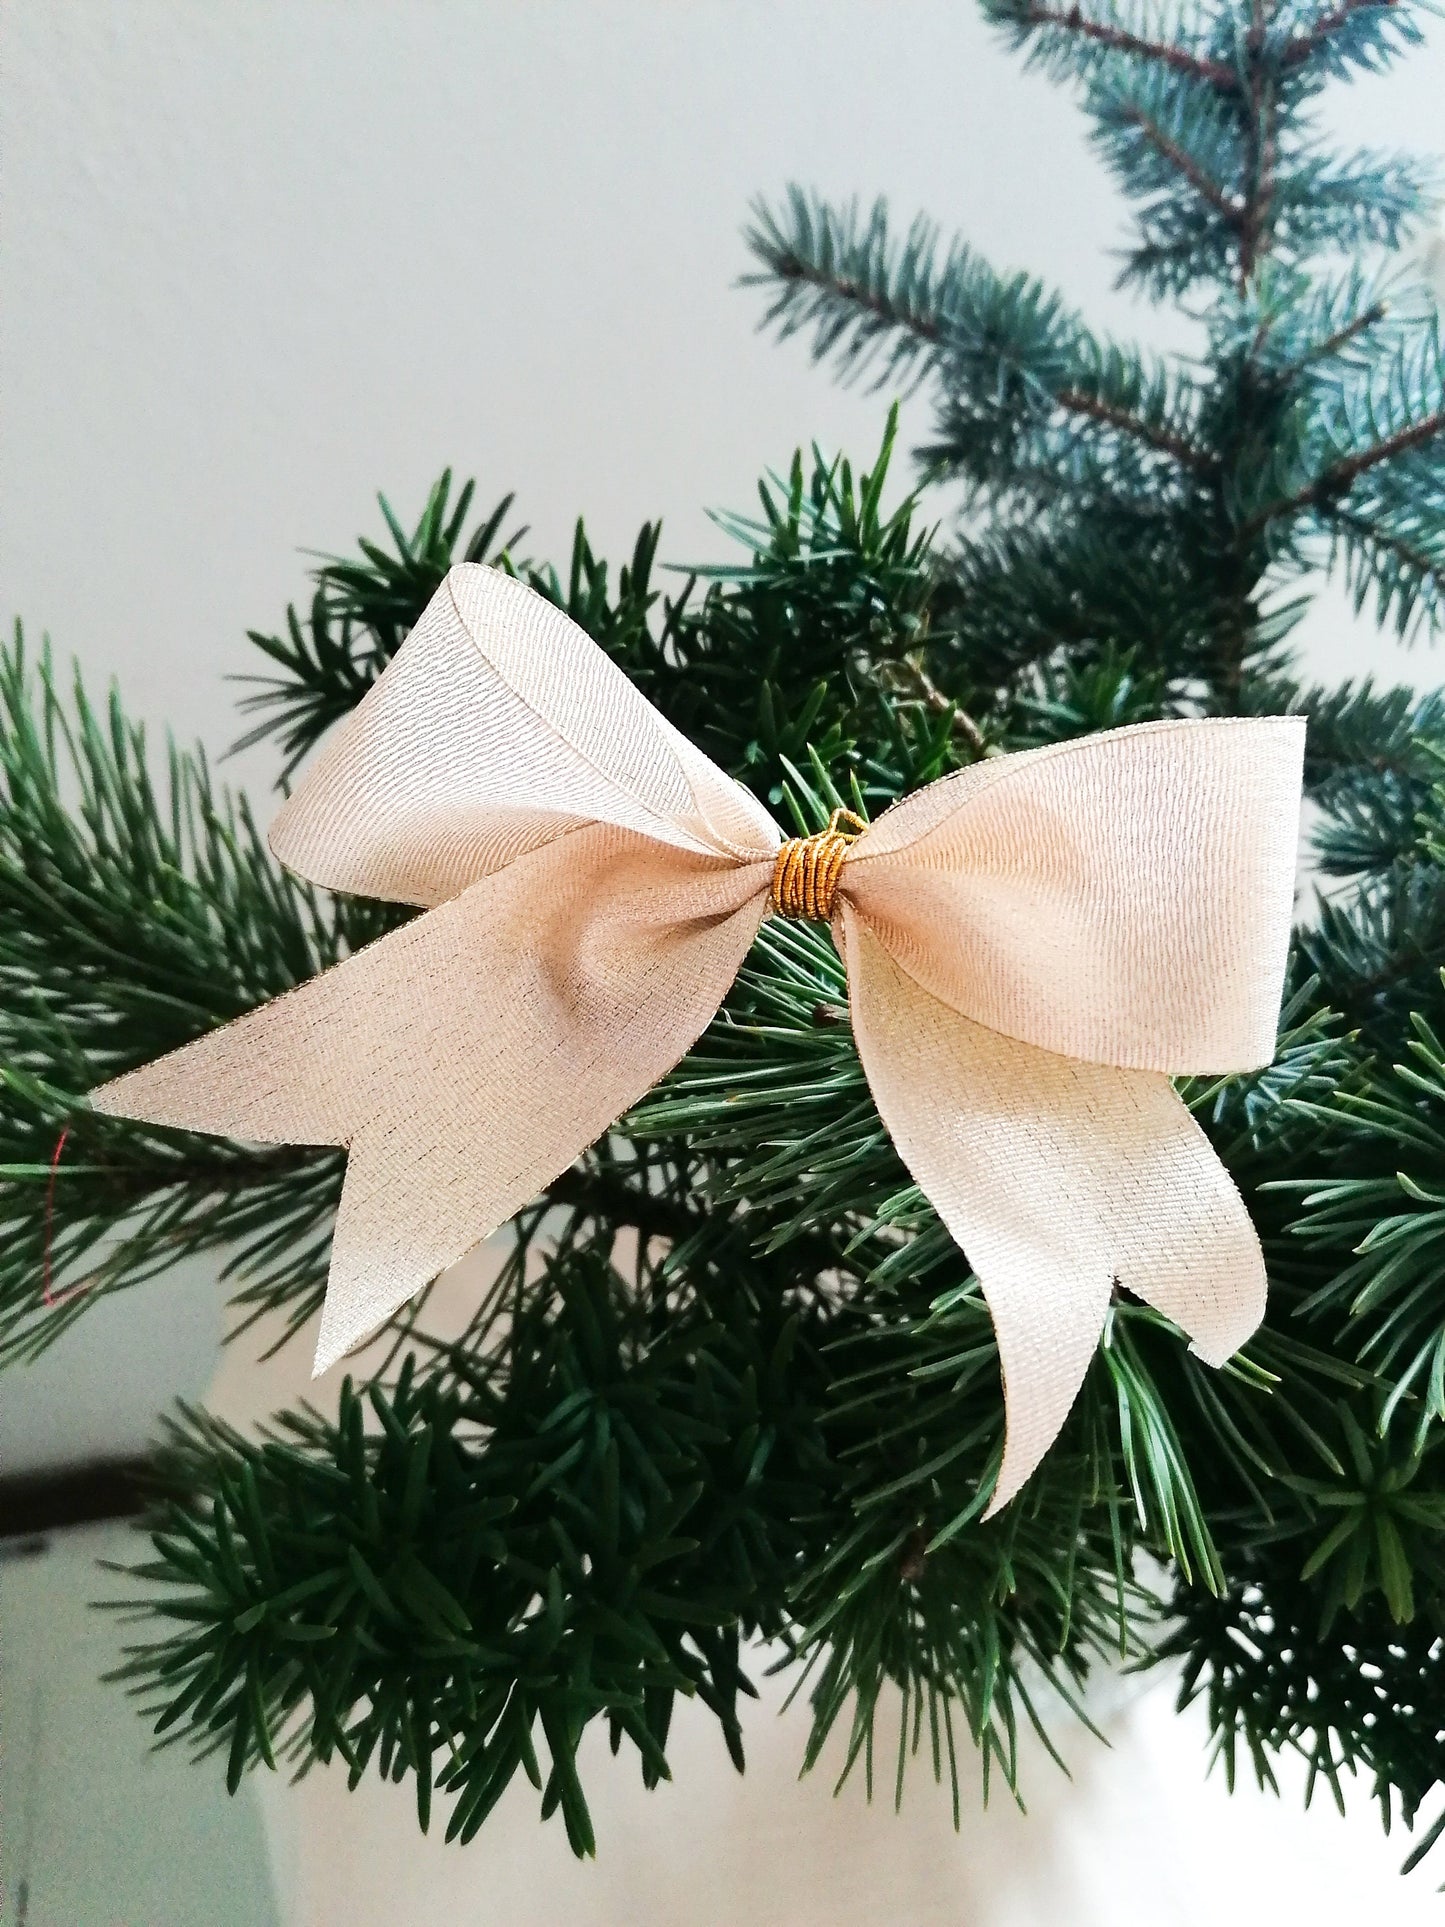 Gold bow ornaments